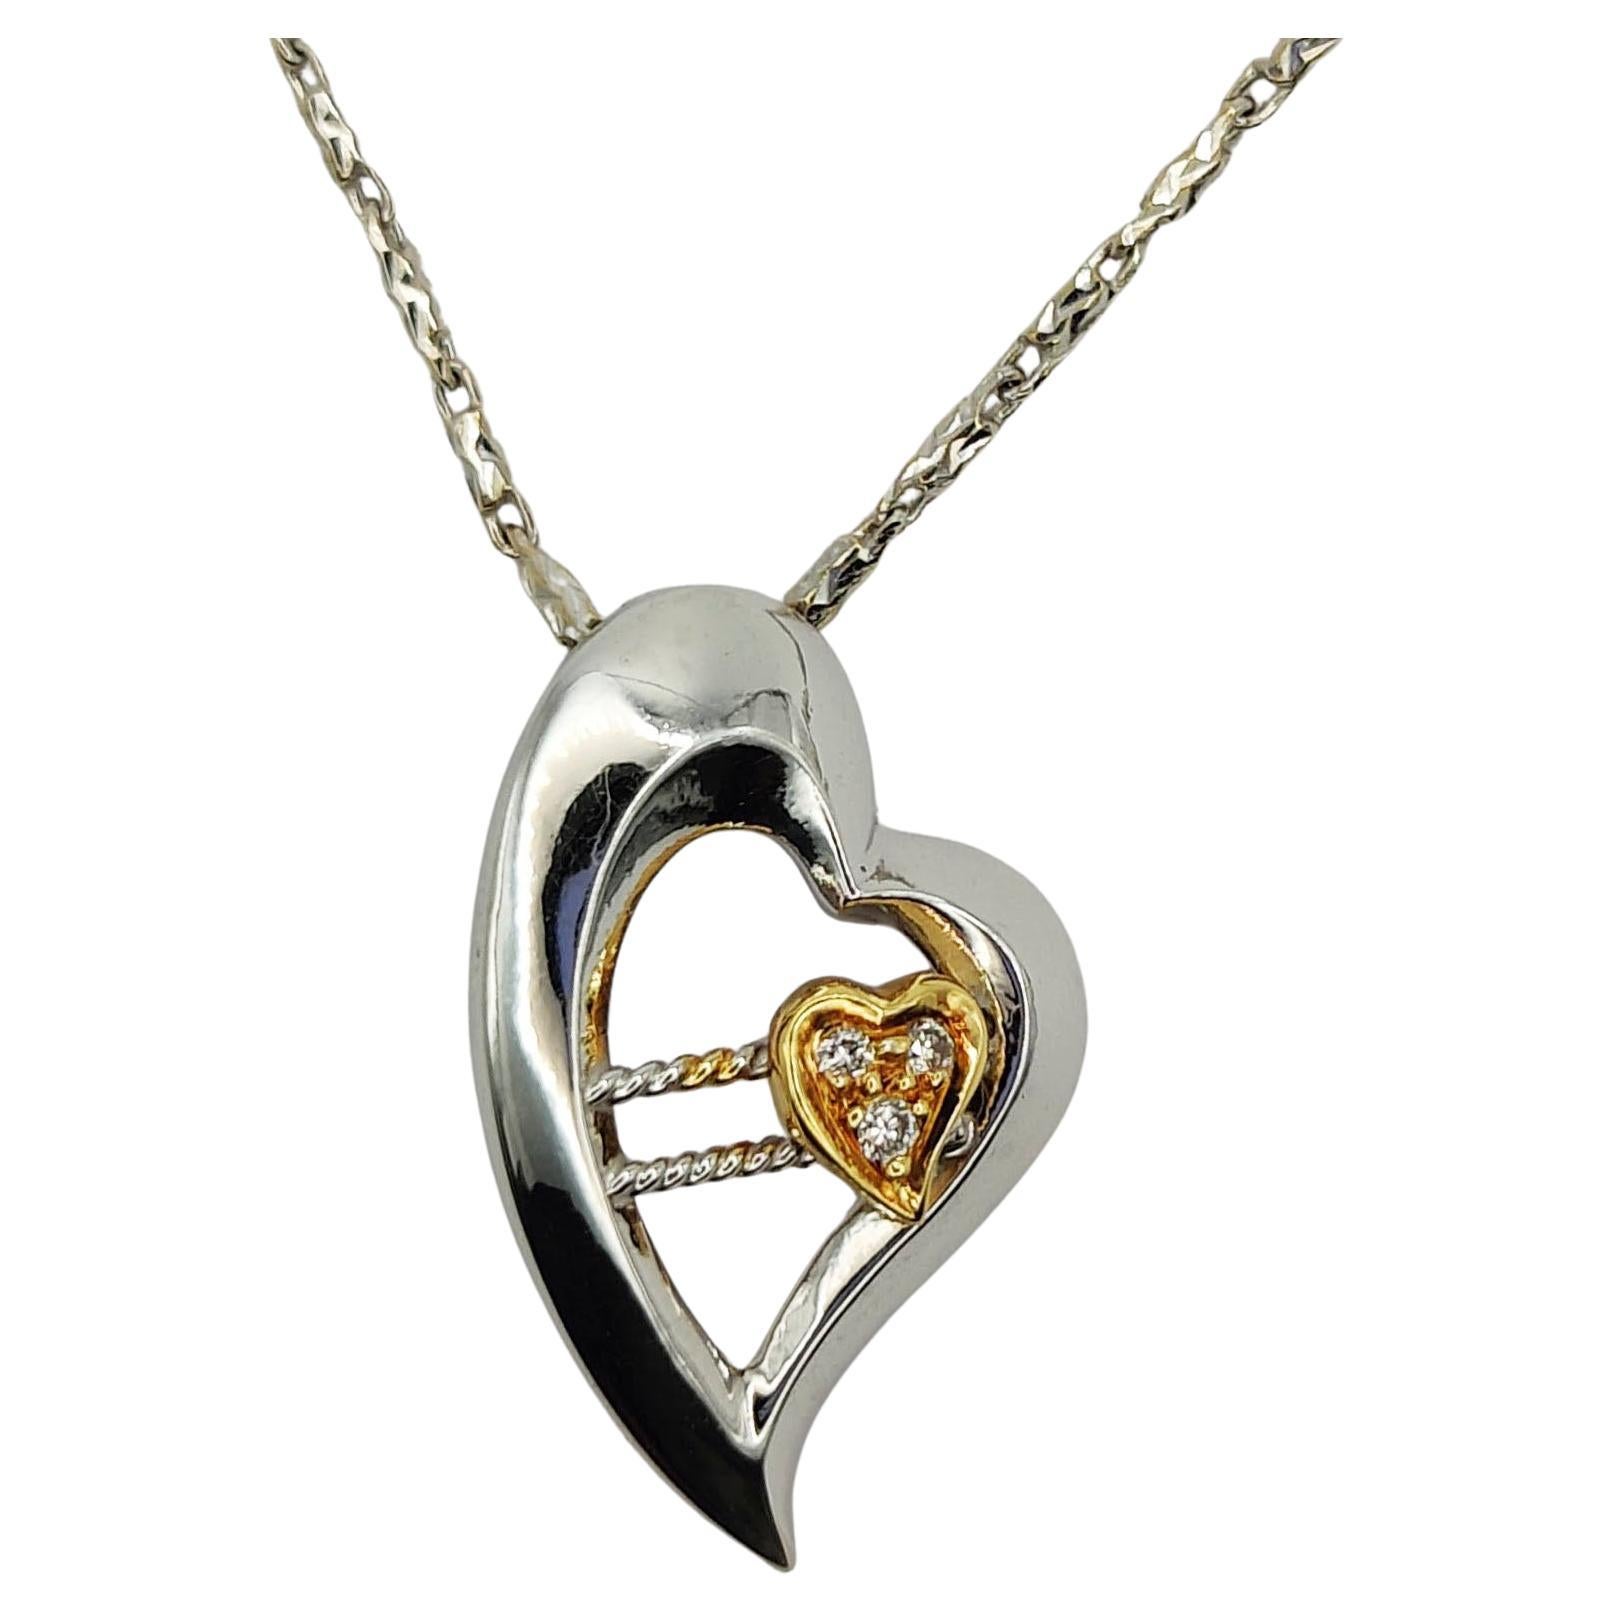 Dynamic Heart Diamond Pendant in 18K White and Yellow Gold